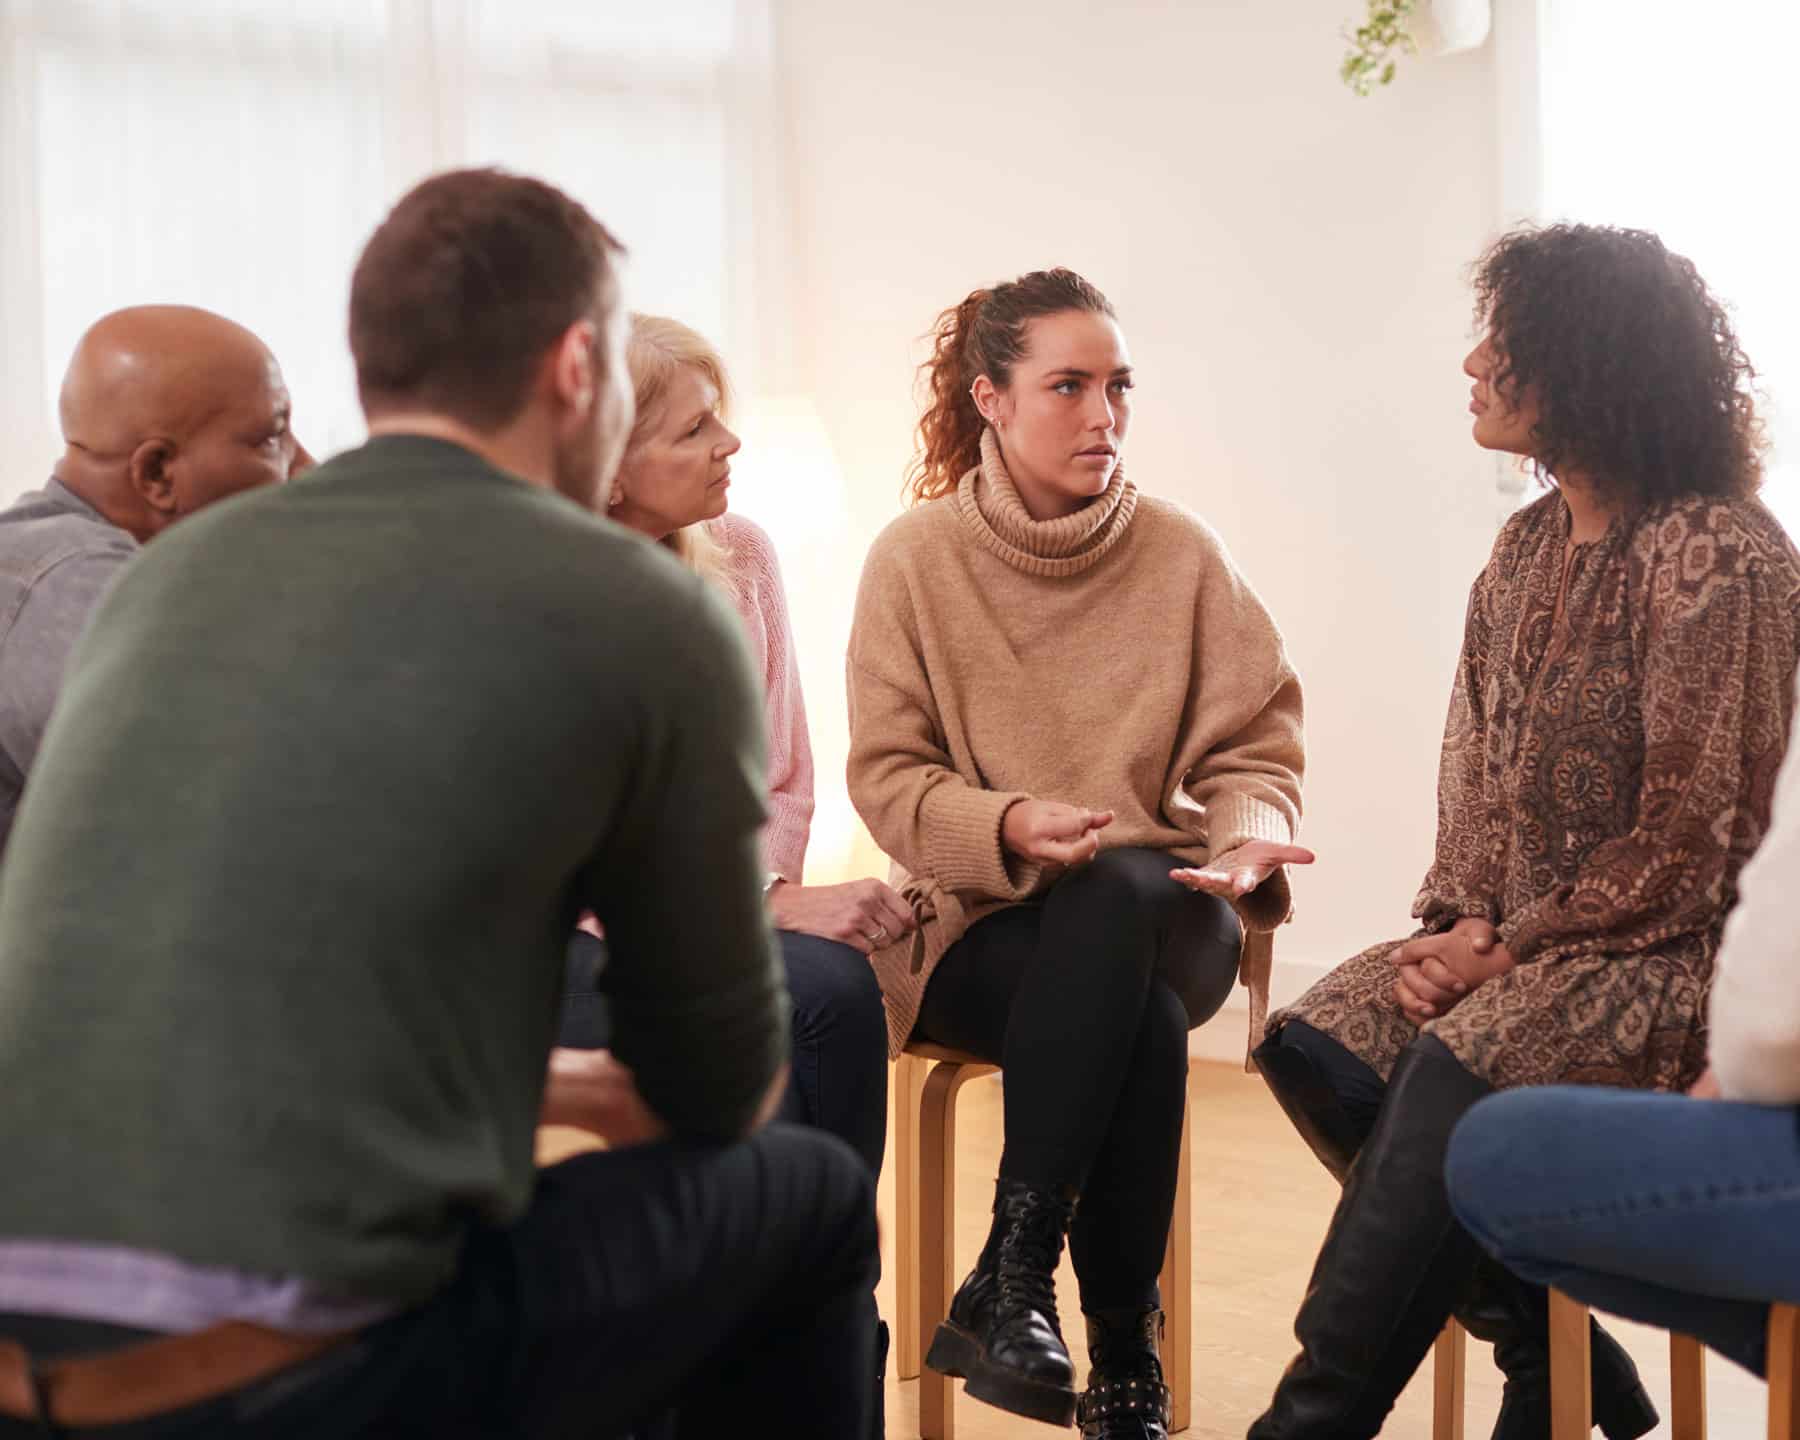 A grief support group talking